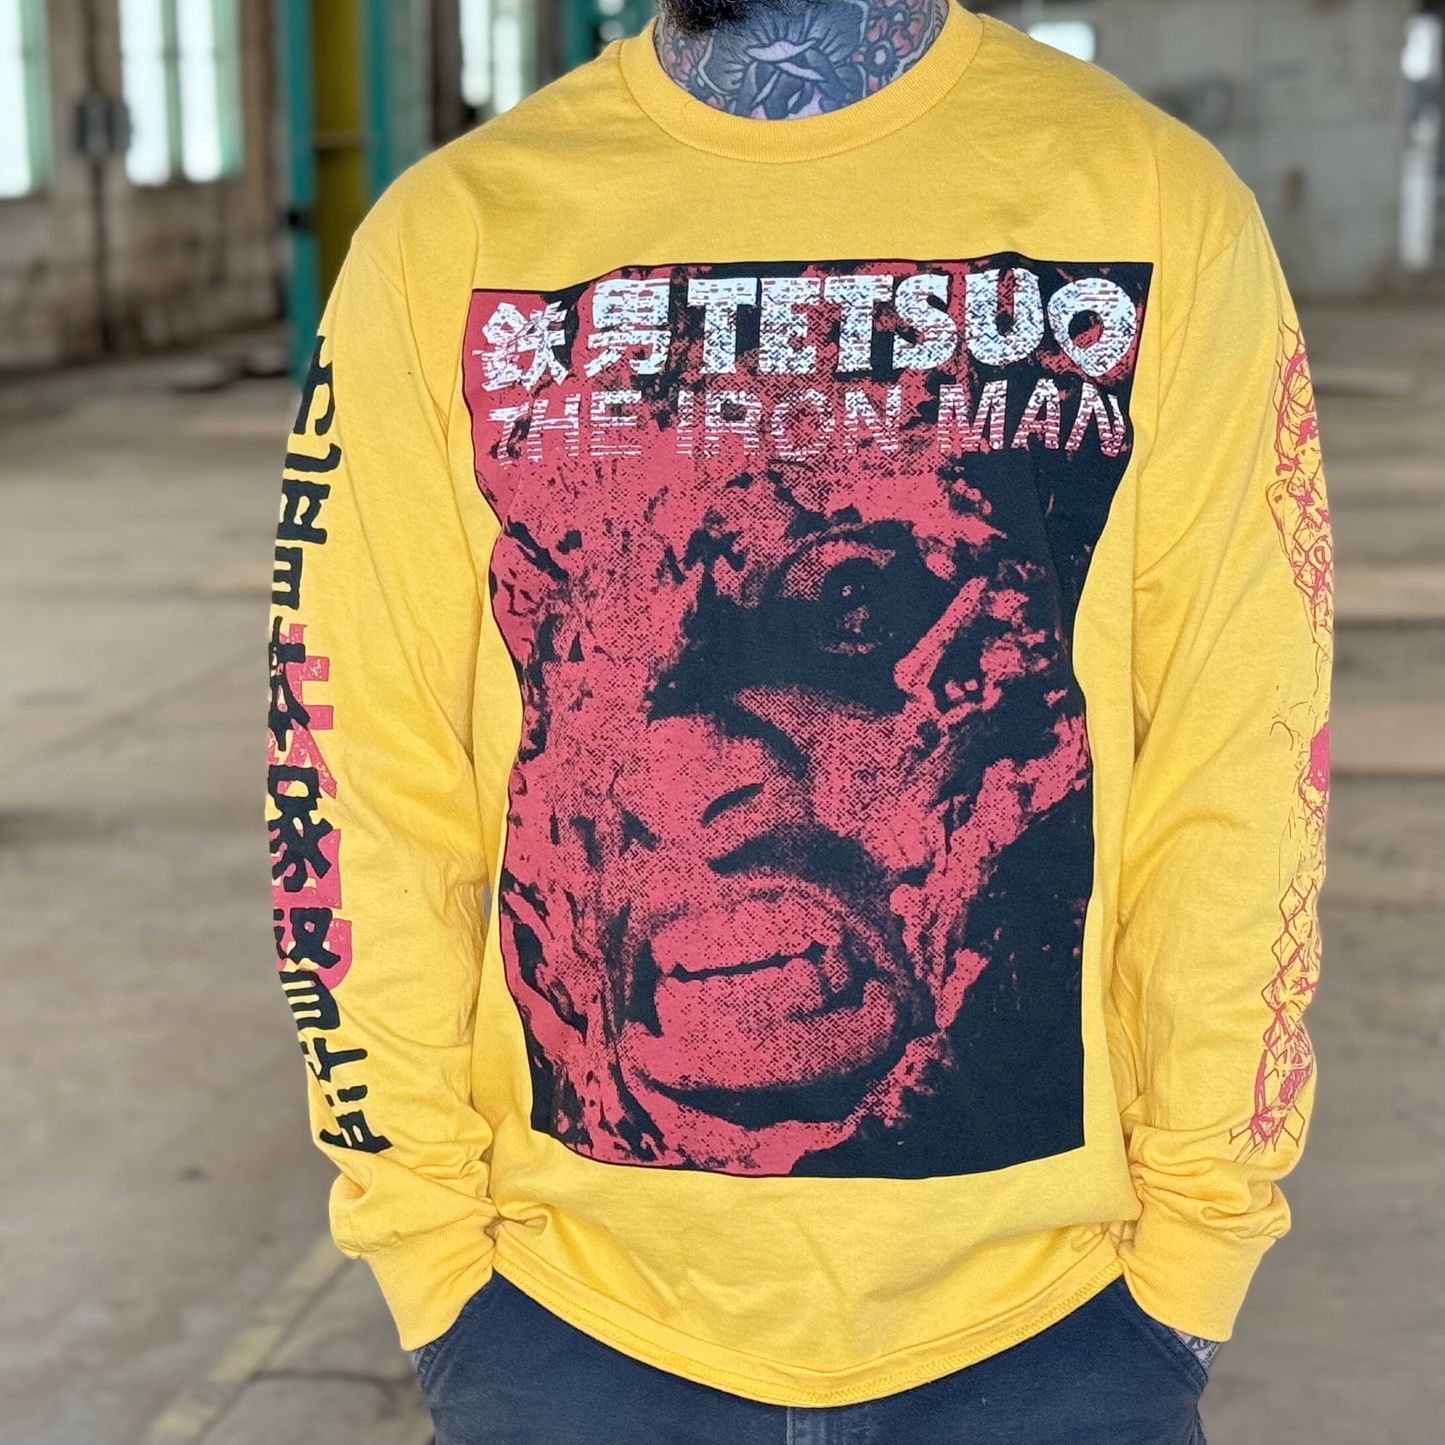 A model wearing the yellow version of the shirt. The picture features the front of the image, with a distorted picture of the main character printed in black and red. The front also reads "Tetsuo The Iron Man" in white.